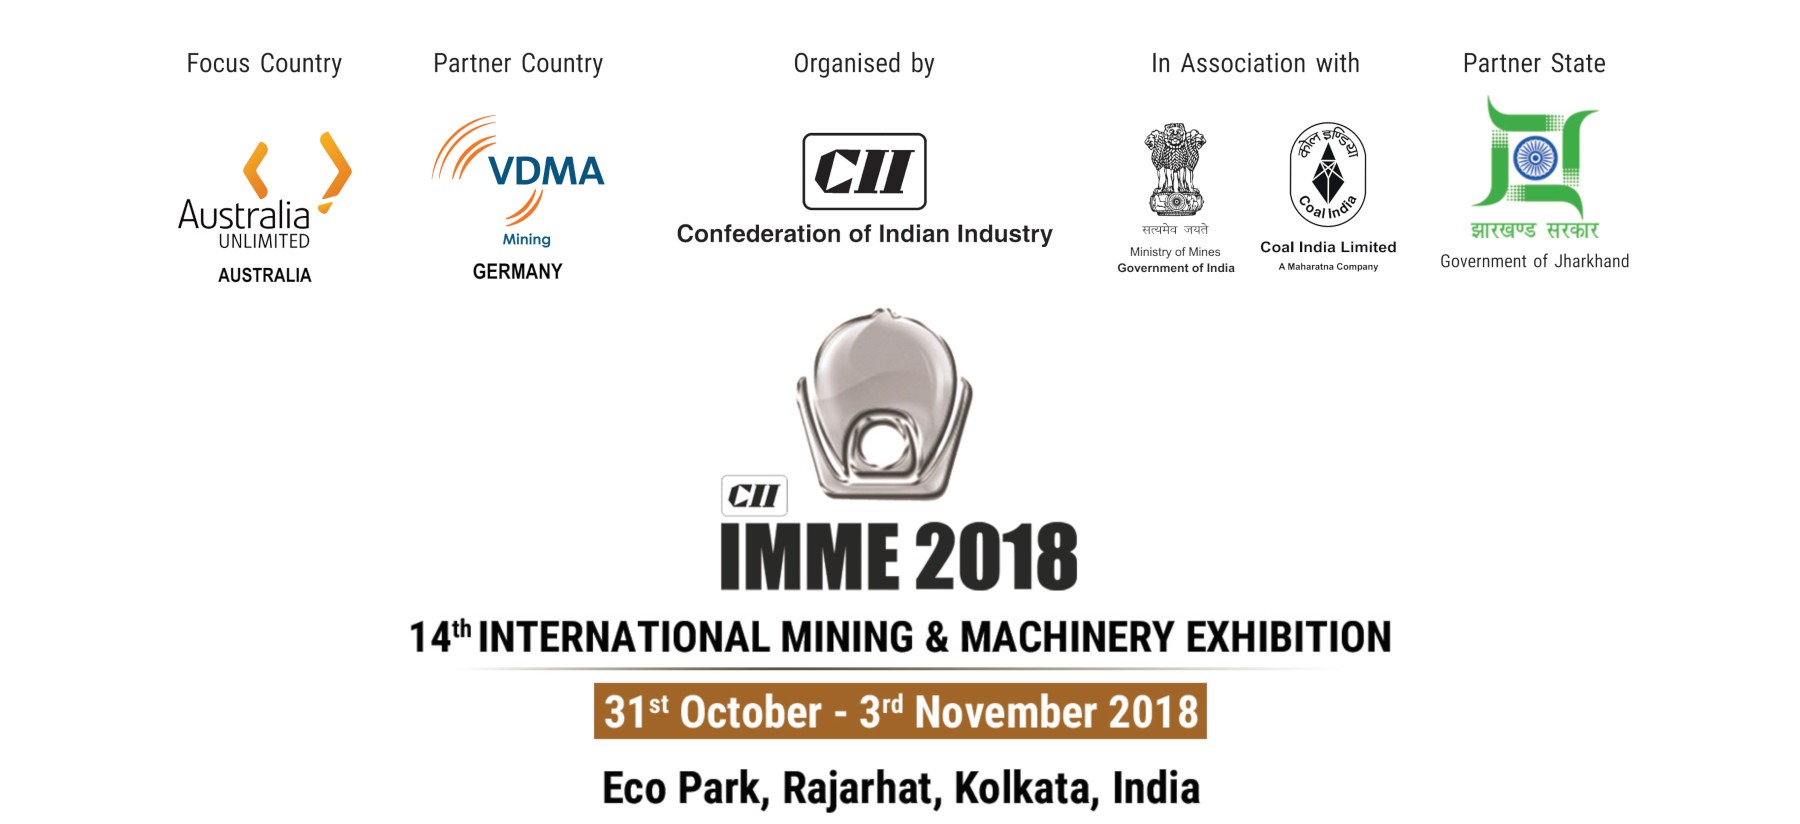 IMME 2018